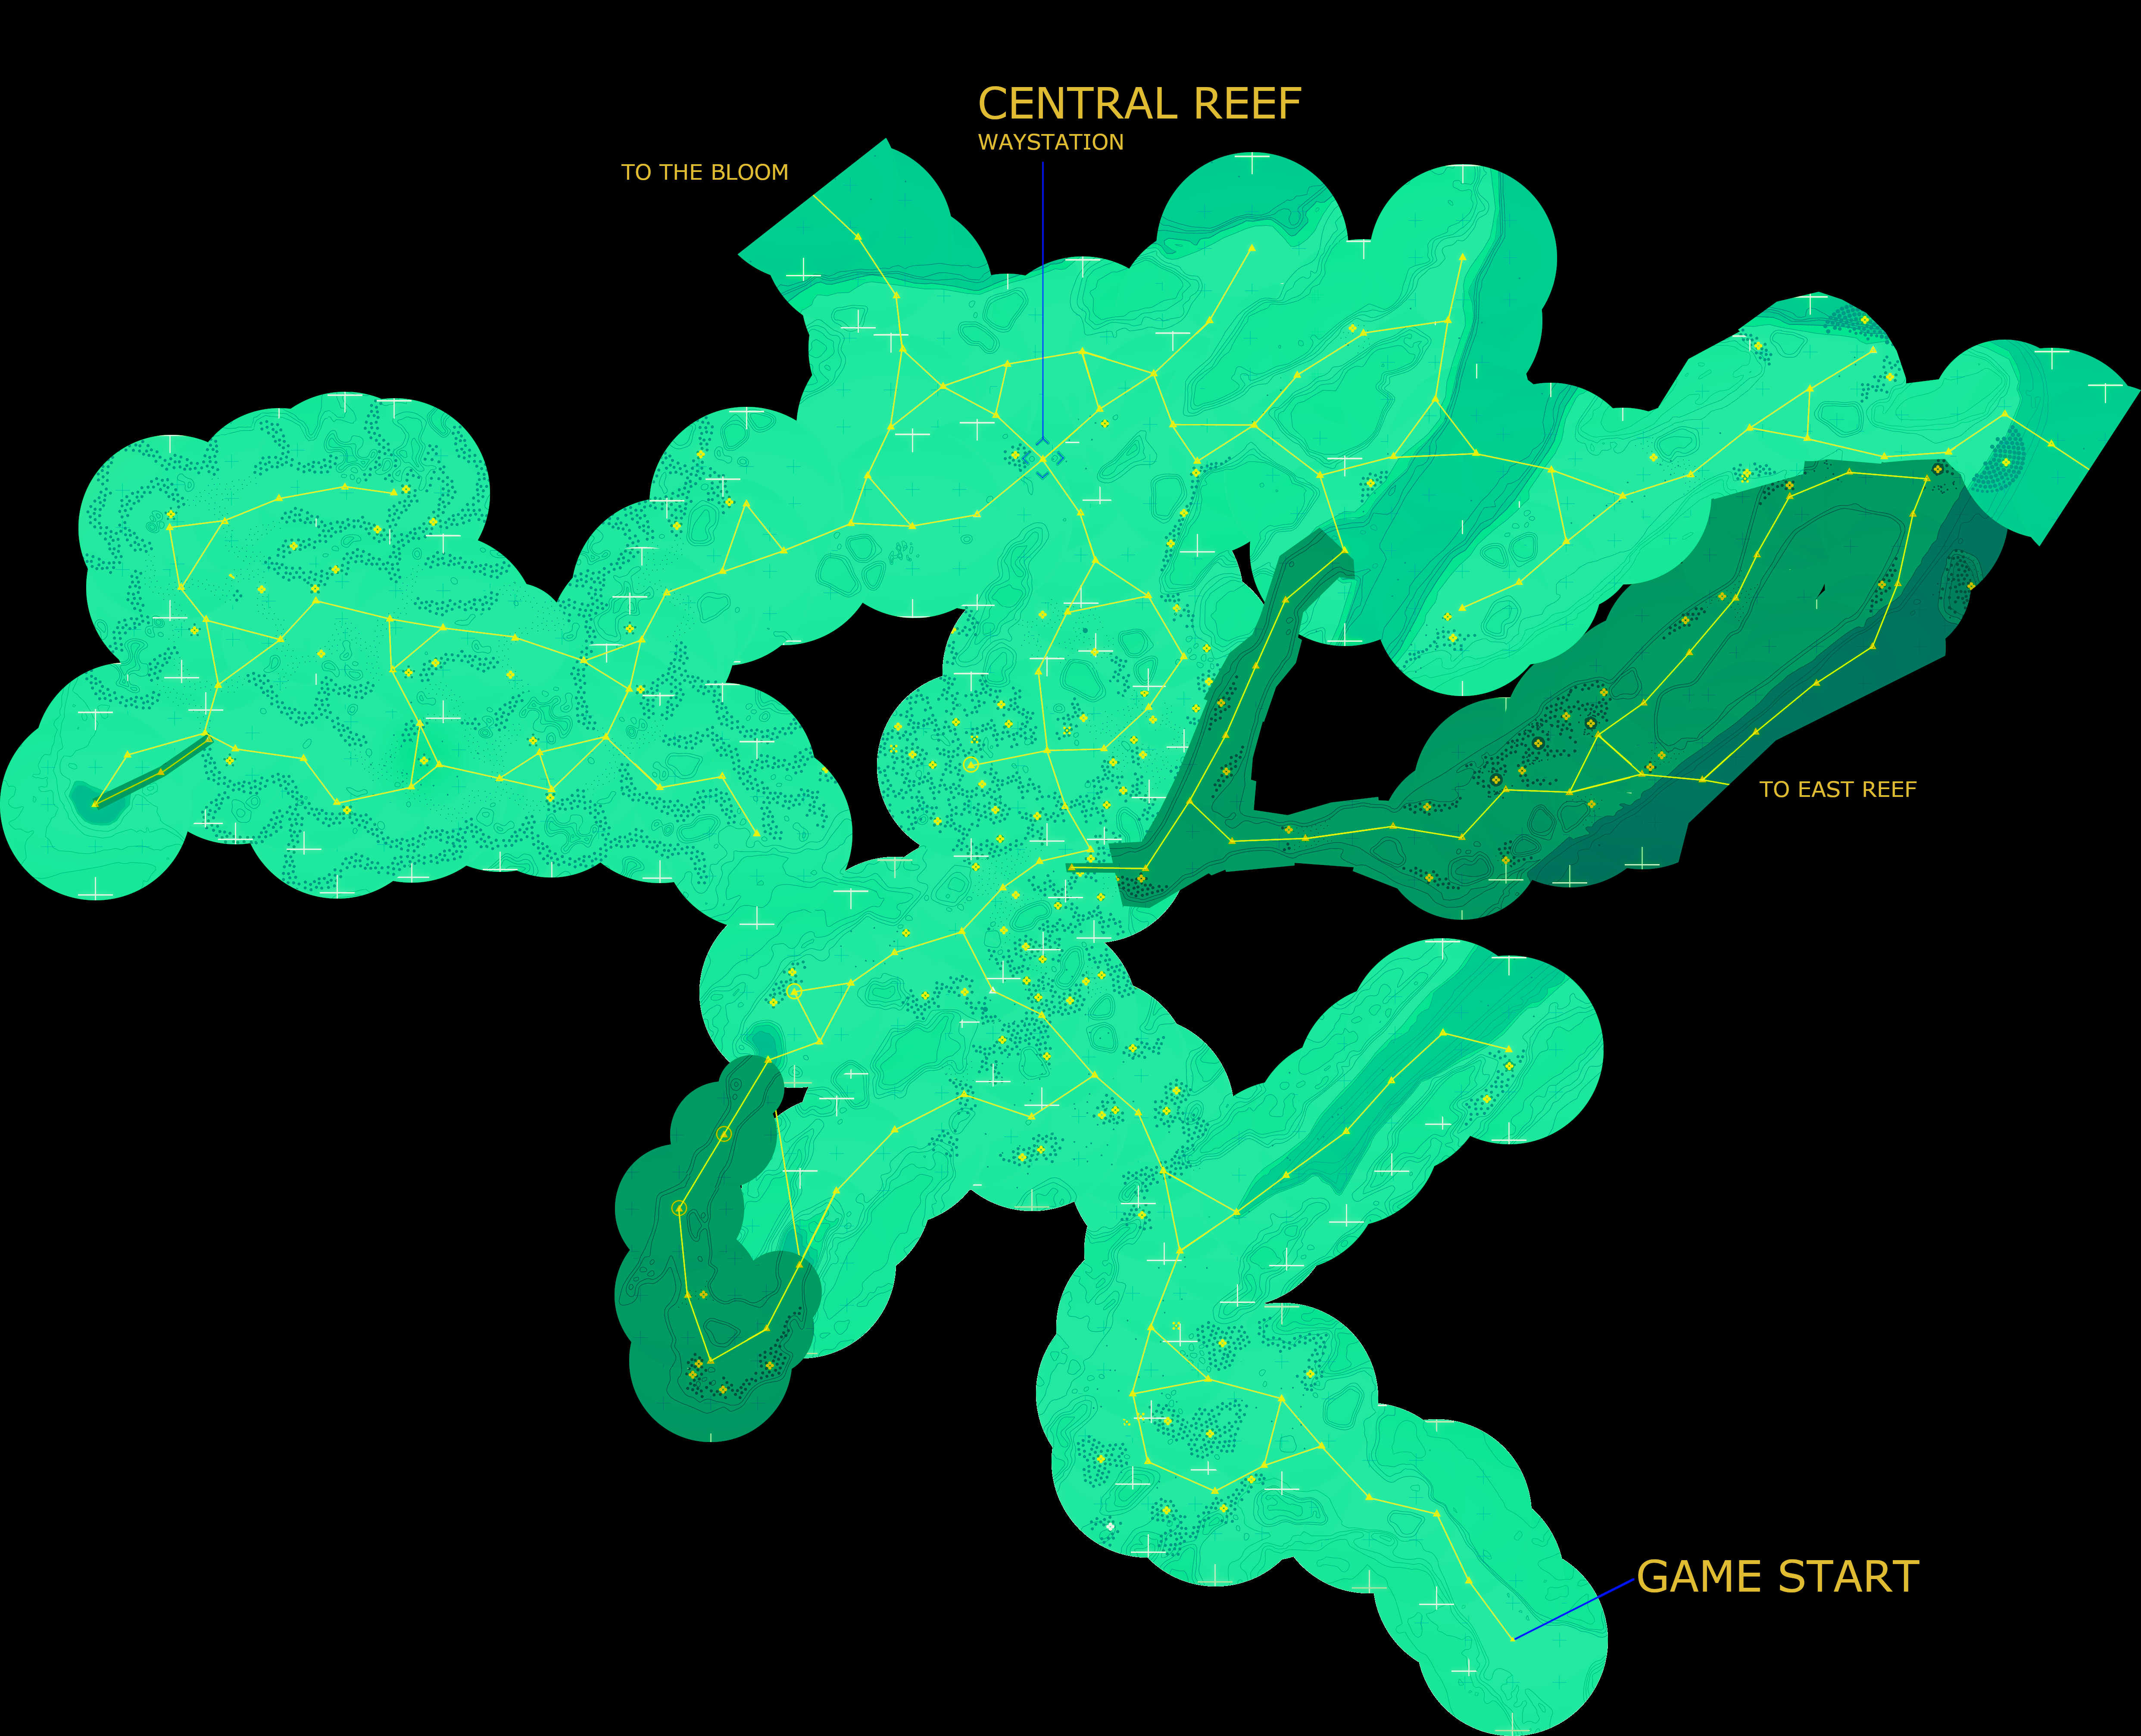 In Other Waters Provides the detailed complete maps - 1. Central Reef - 6E0F7AE